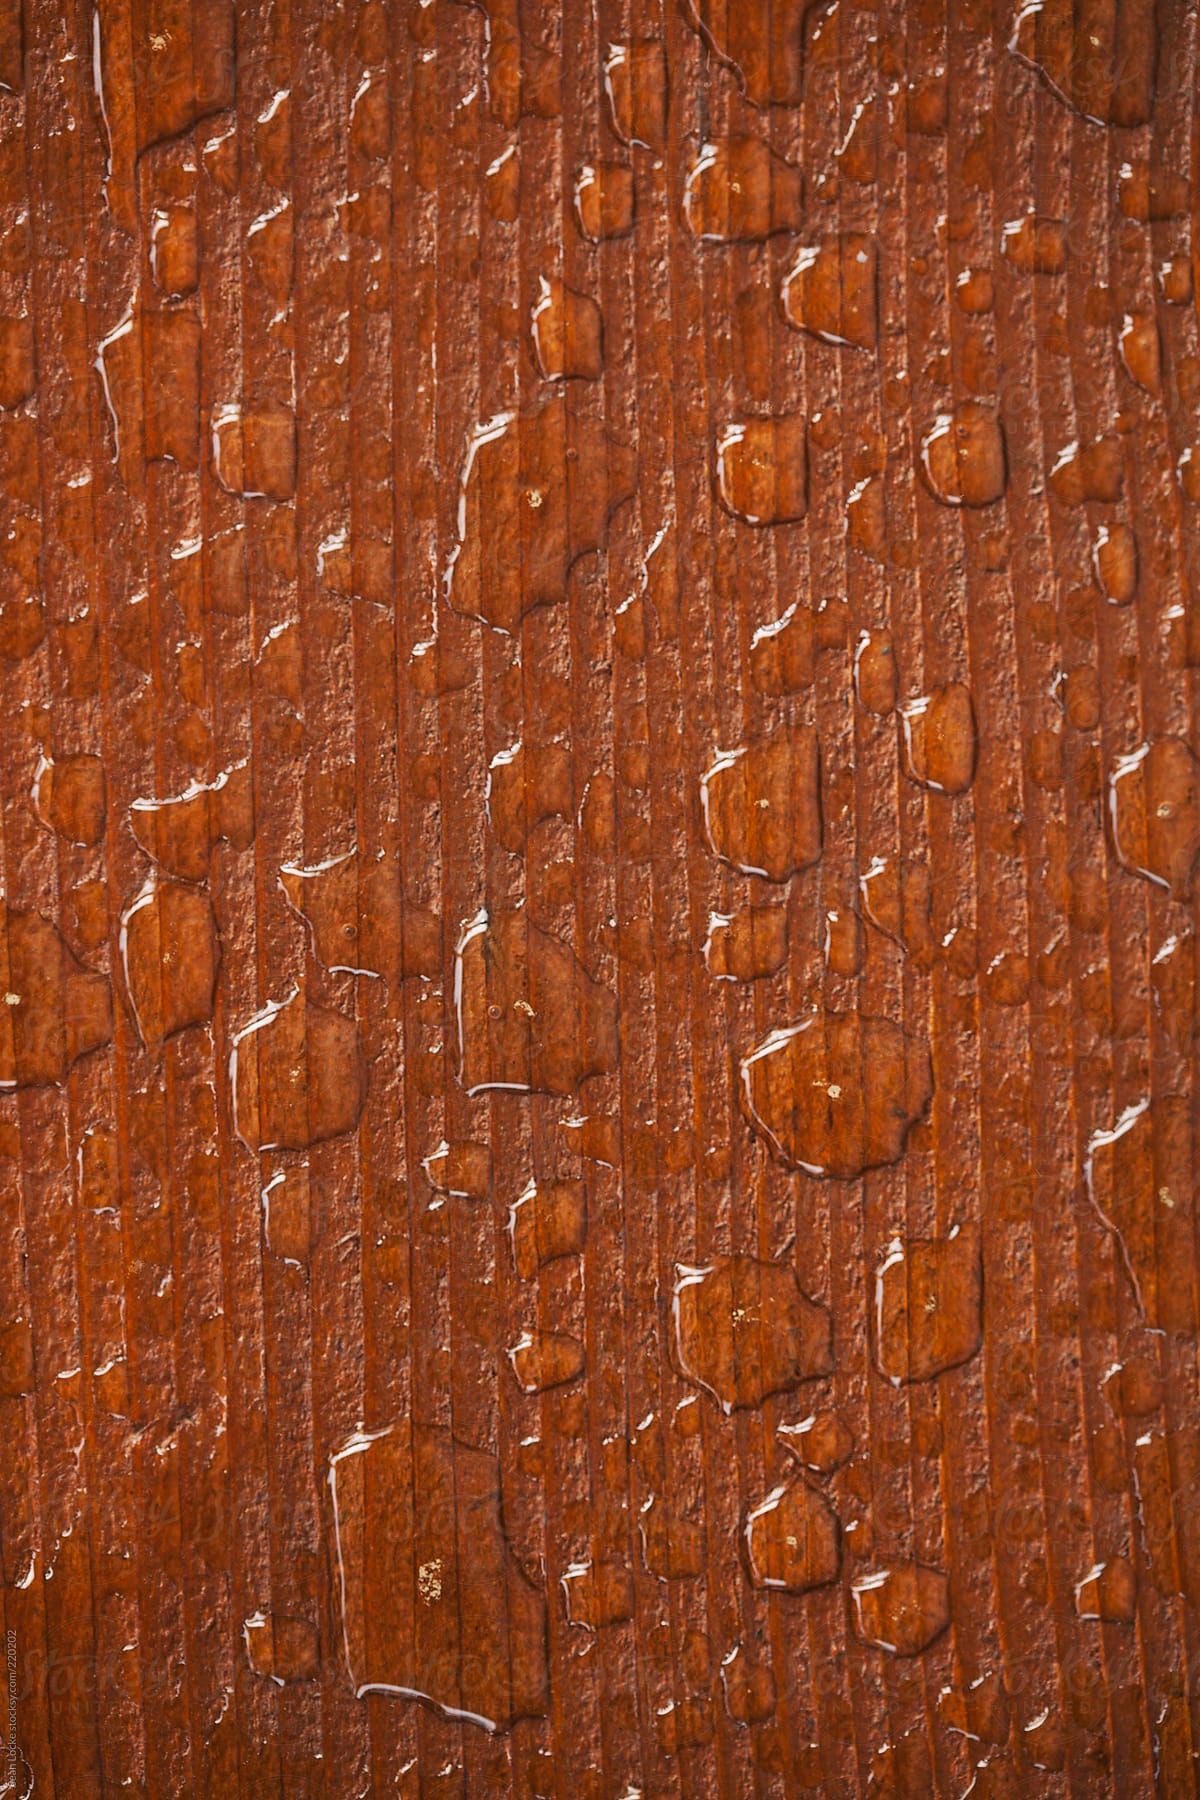 Staining: Water Beading On Freshly Stained Wooden Deck